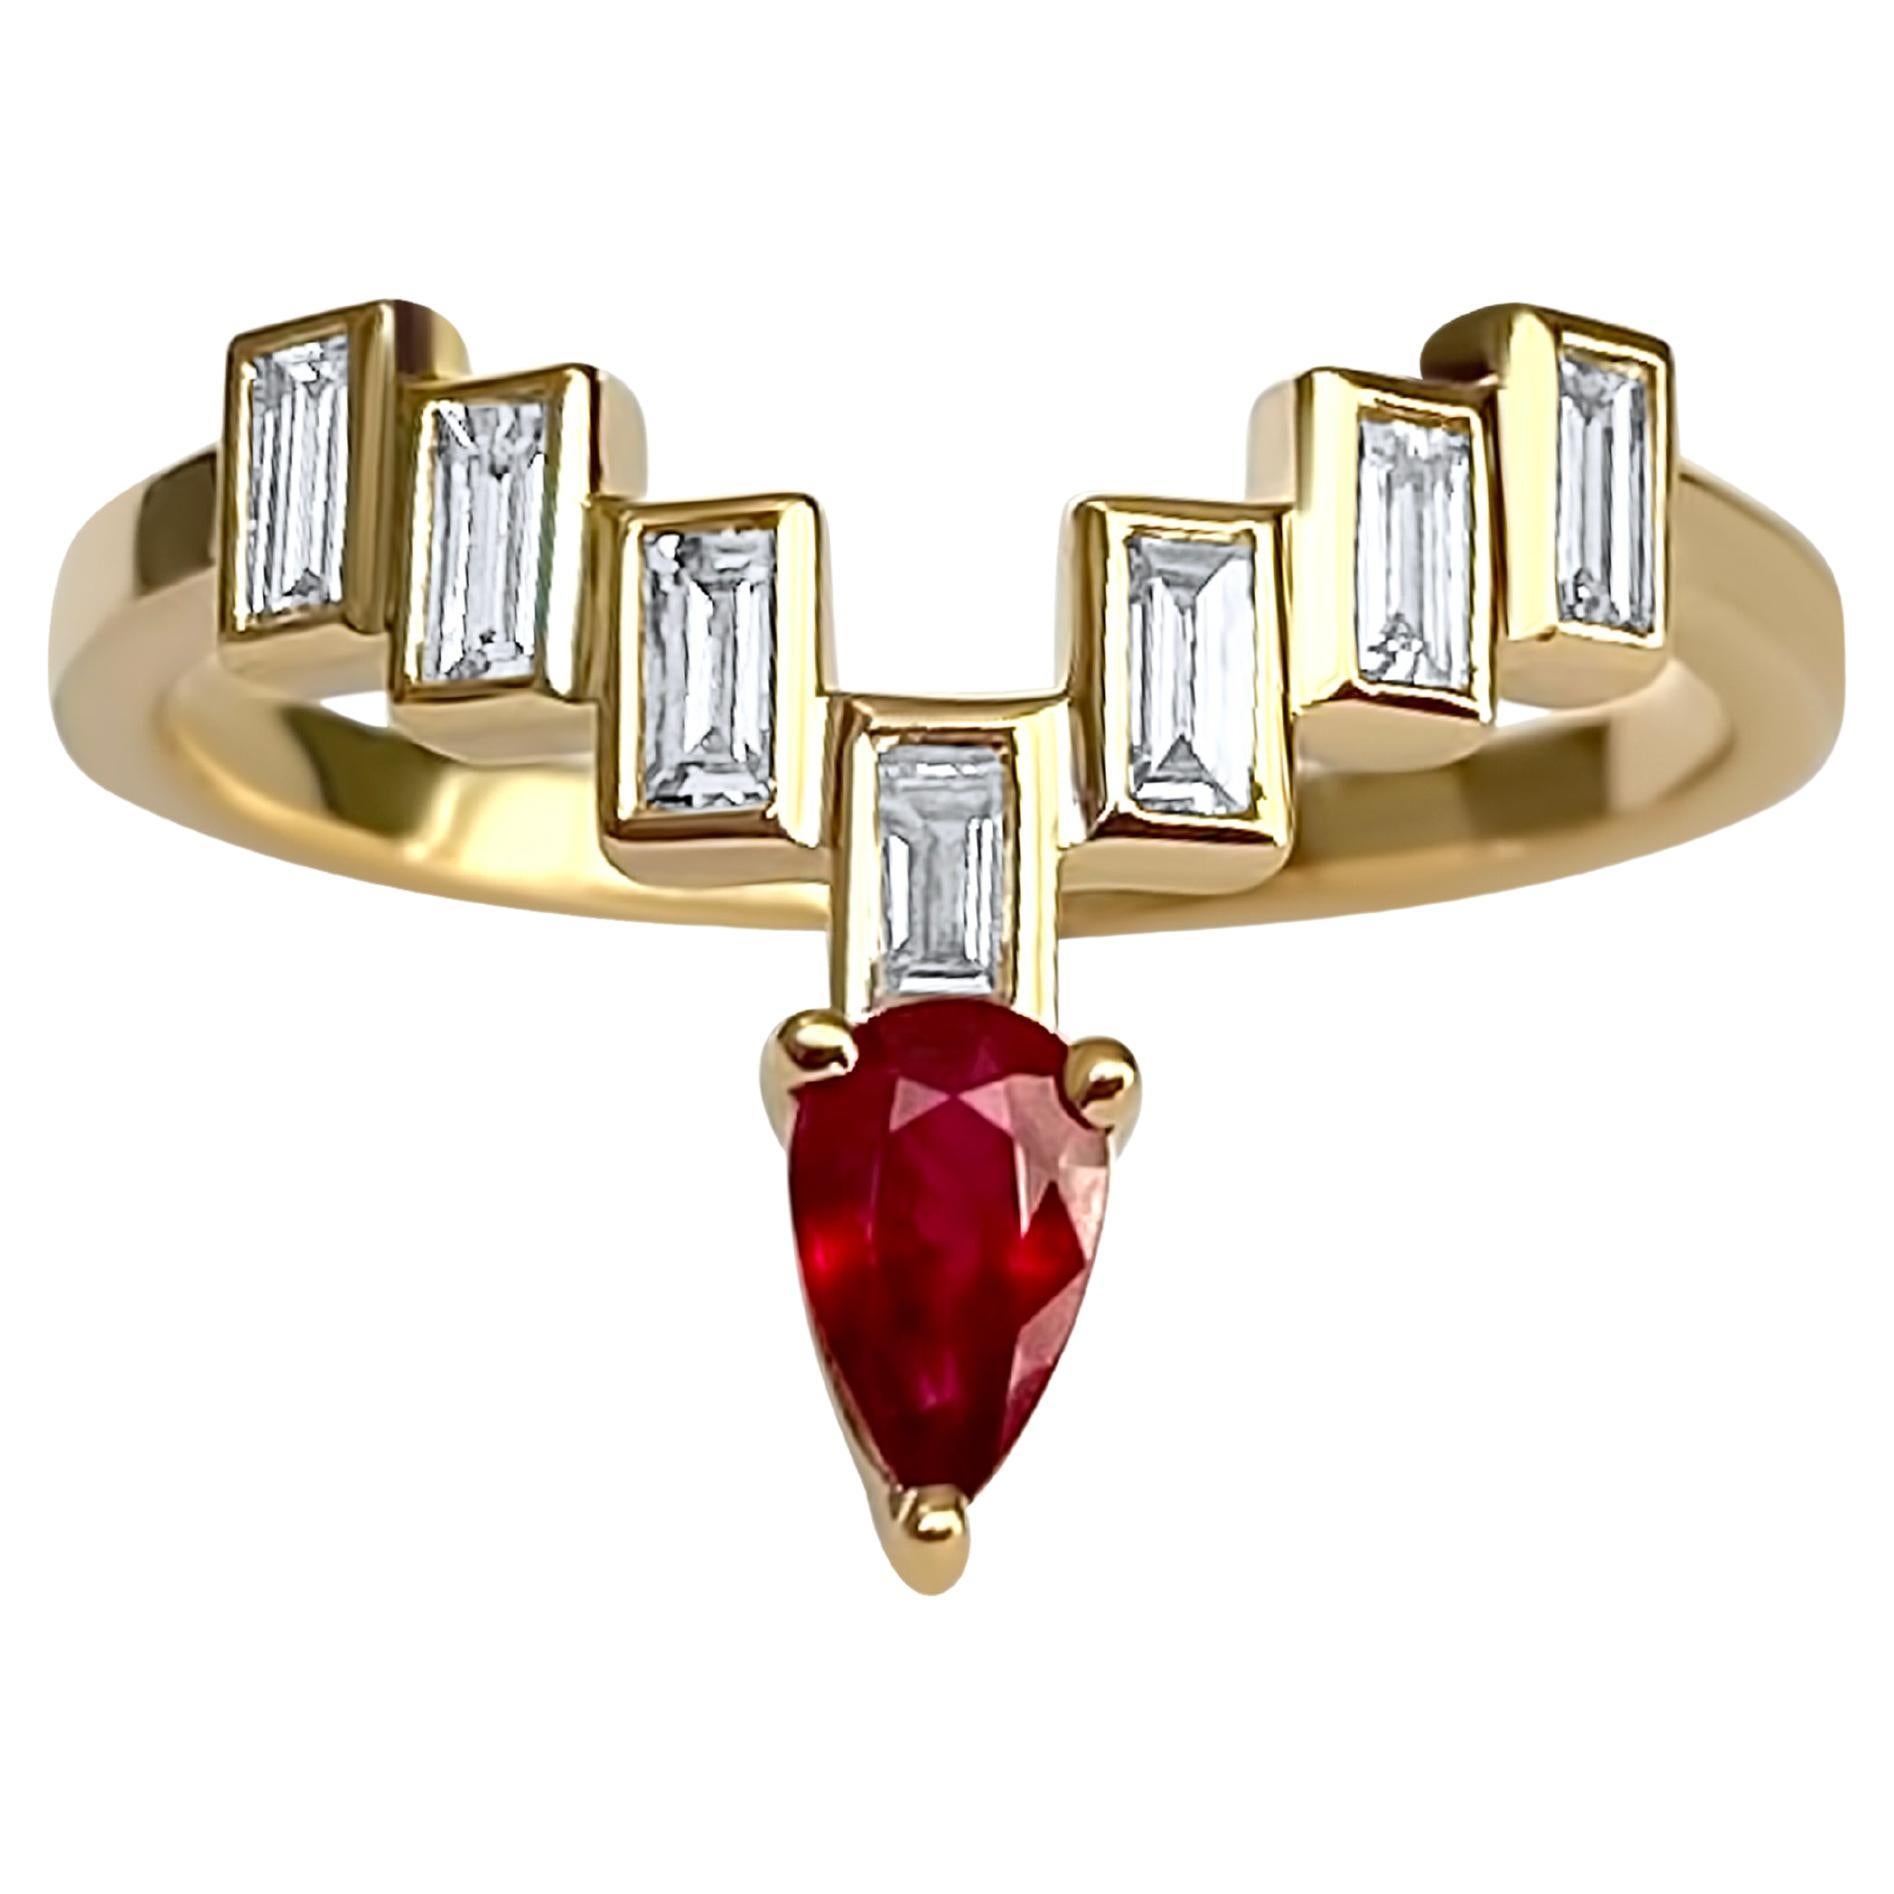 Enlightenment Celestial Crown Tiara Diamond Baguette and Ruby Ring For Sale